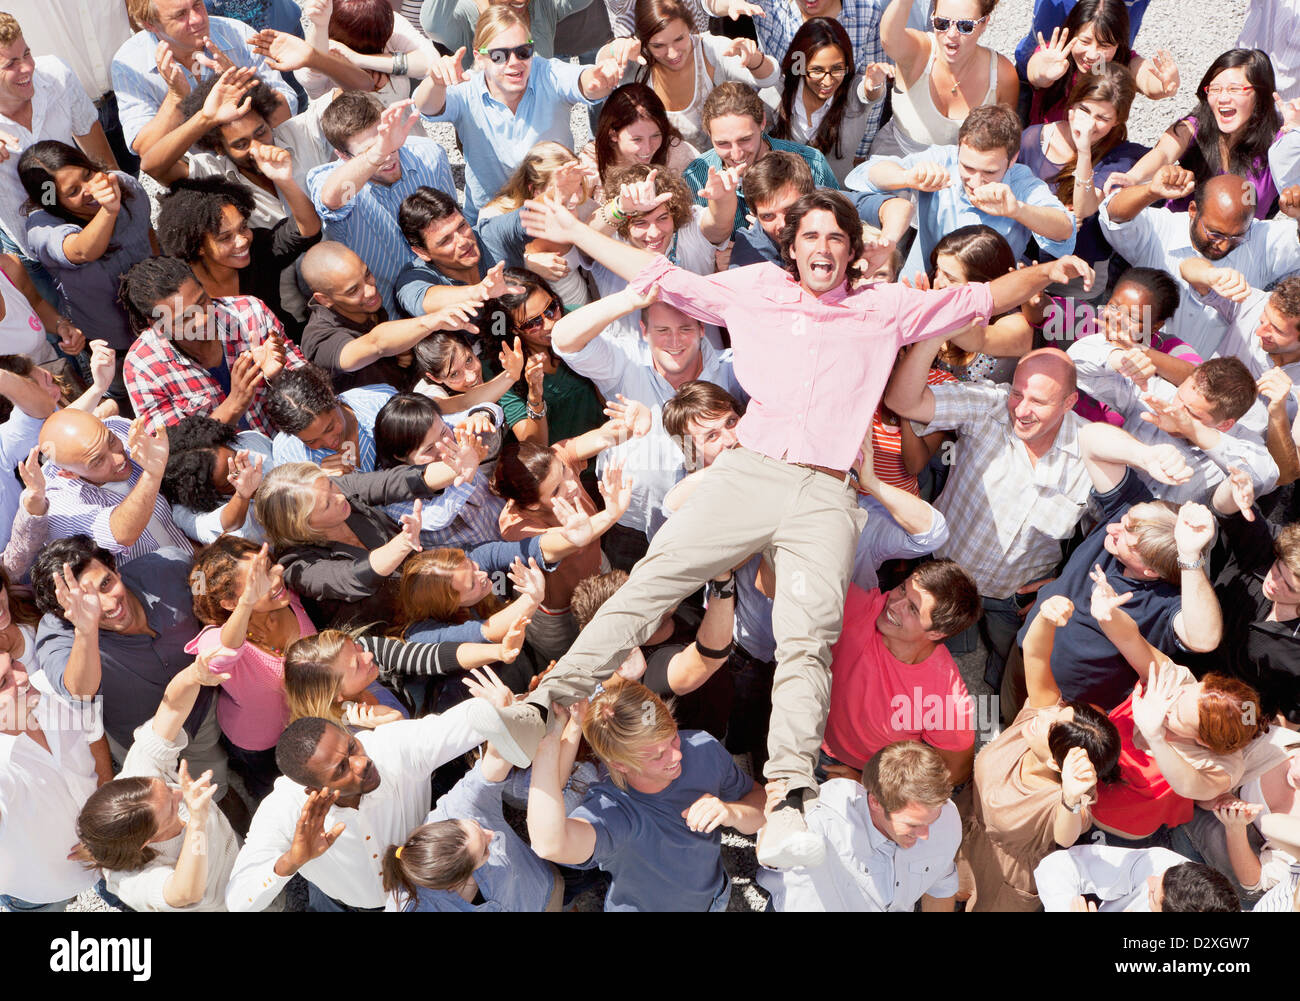 Portrait of enthusiastic man crowd surfing Stock Photo